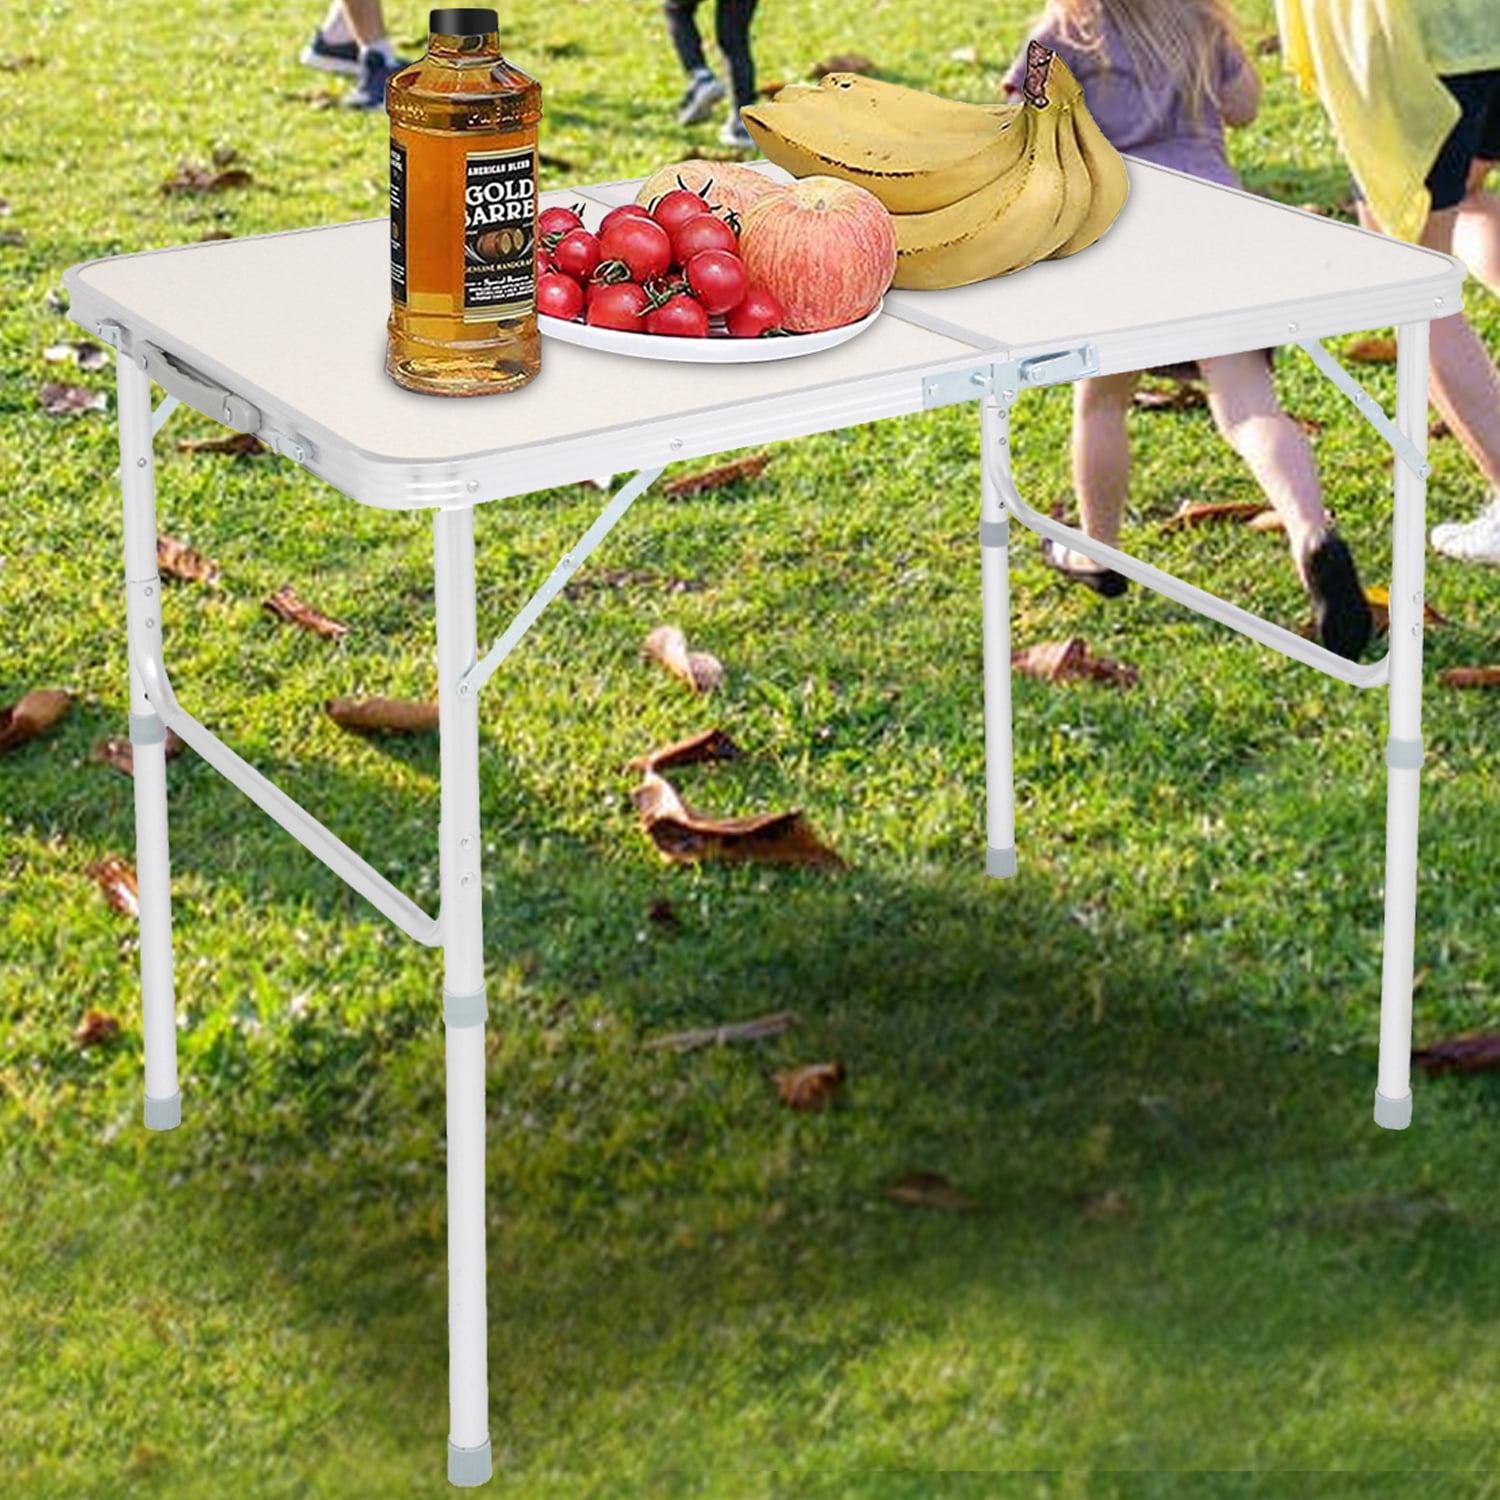 Adjustable Height Portable Centerfold Folding Table In/Outdoor Camp Party Picnic 